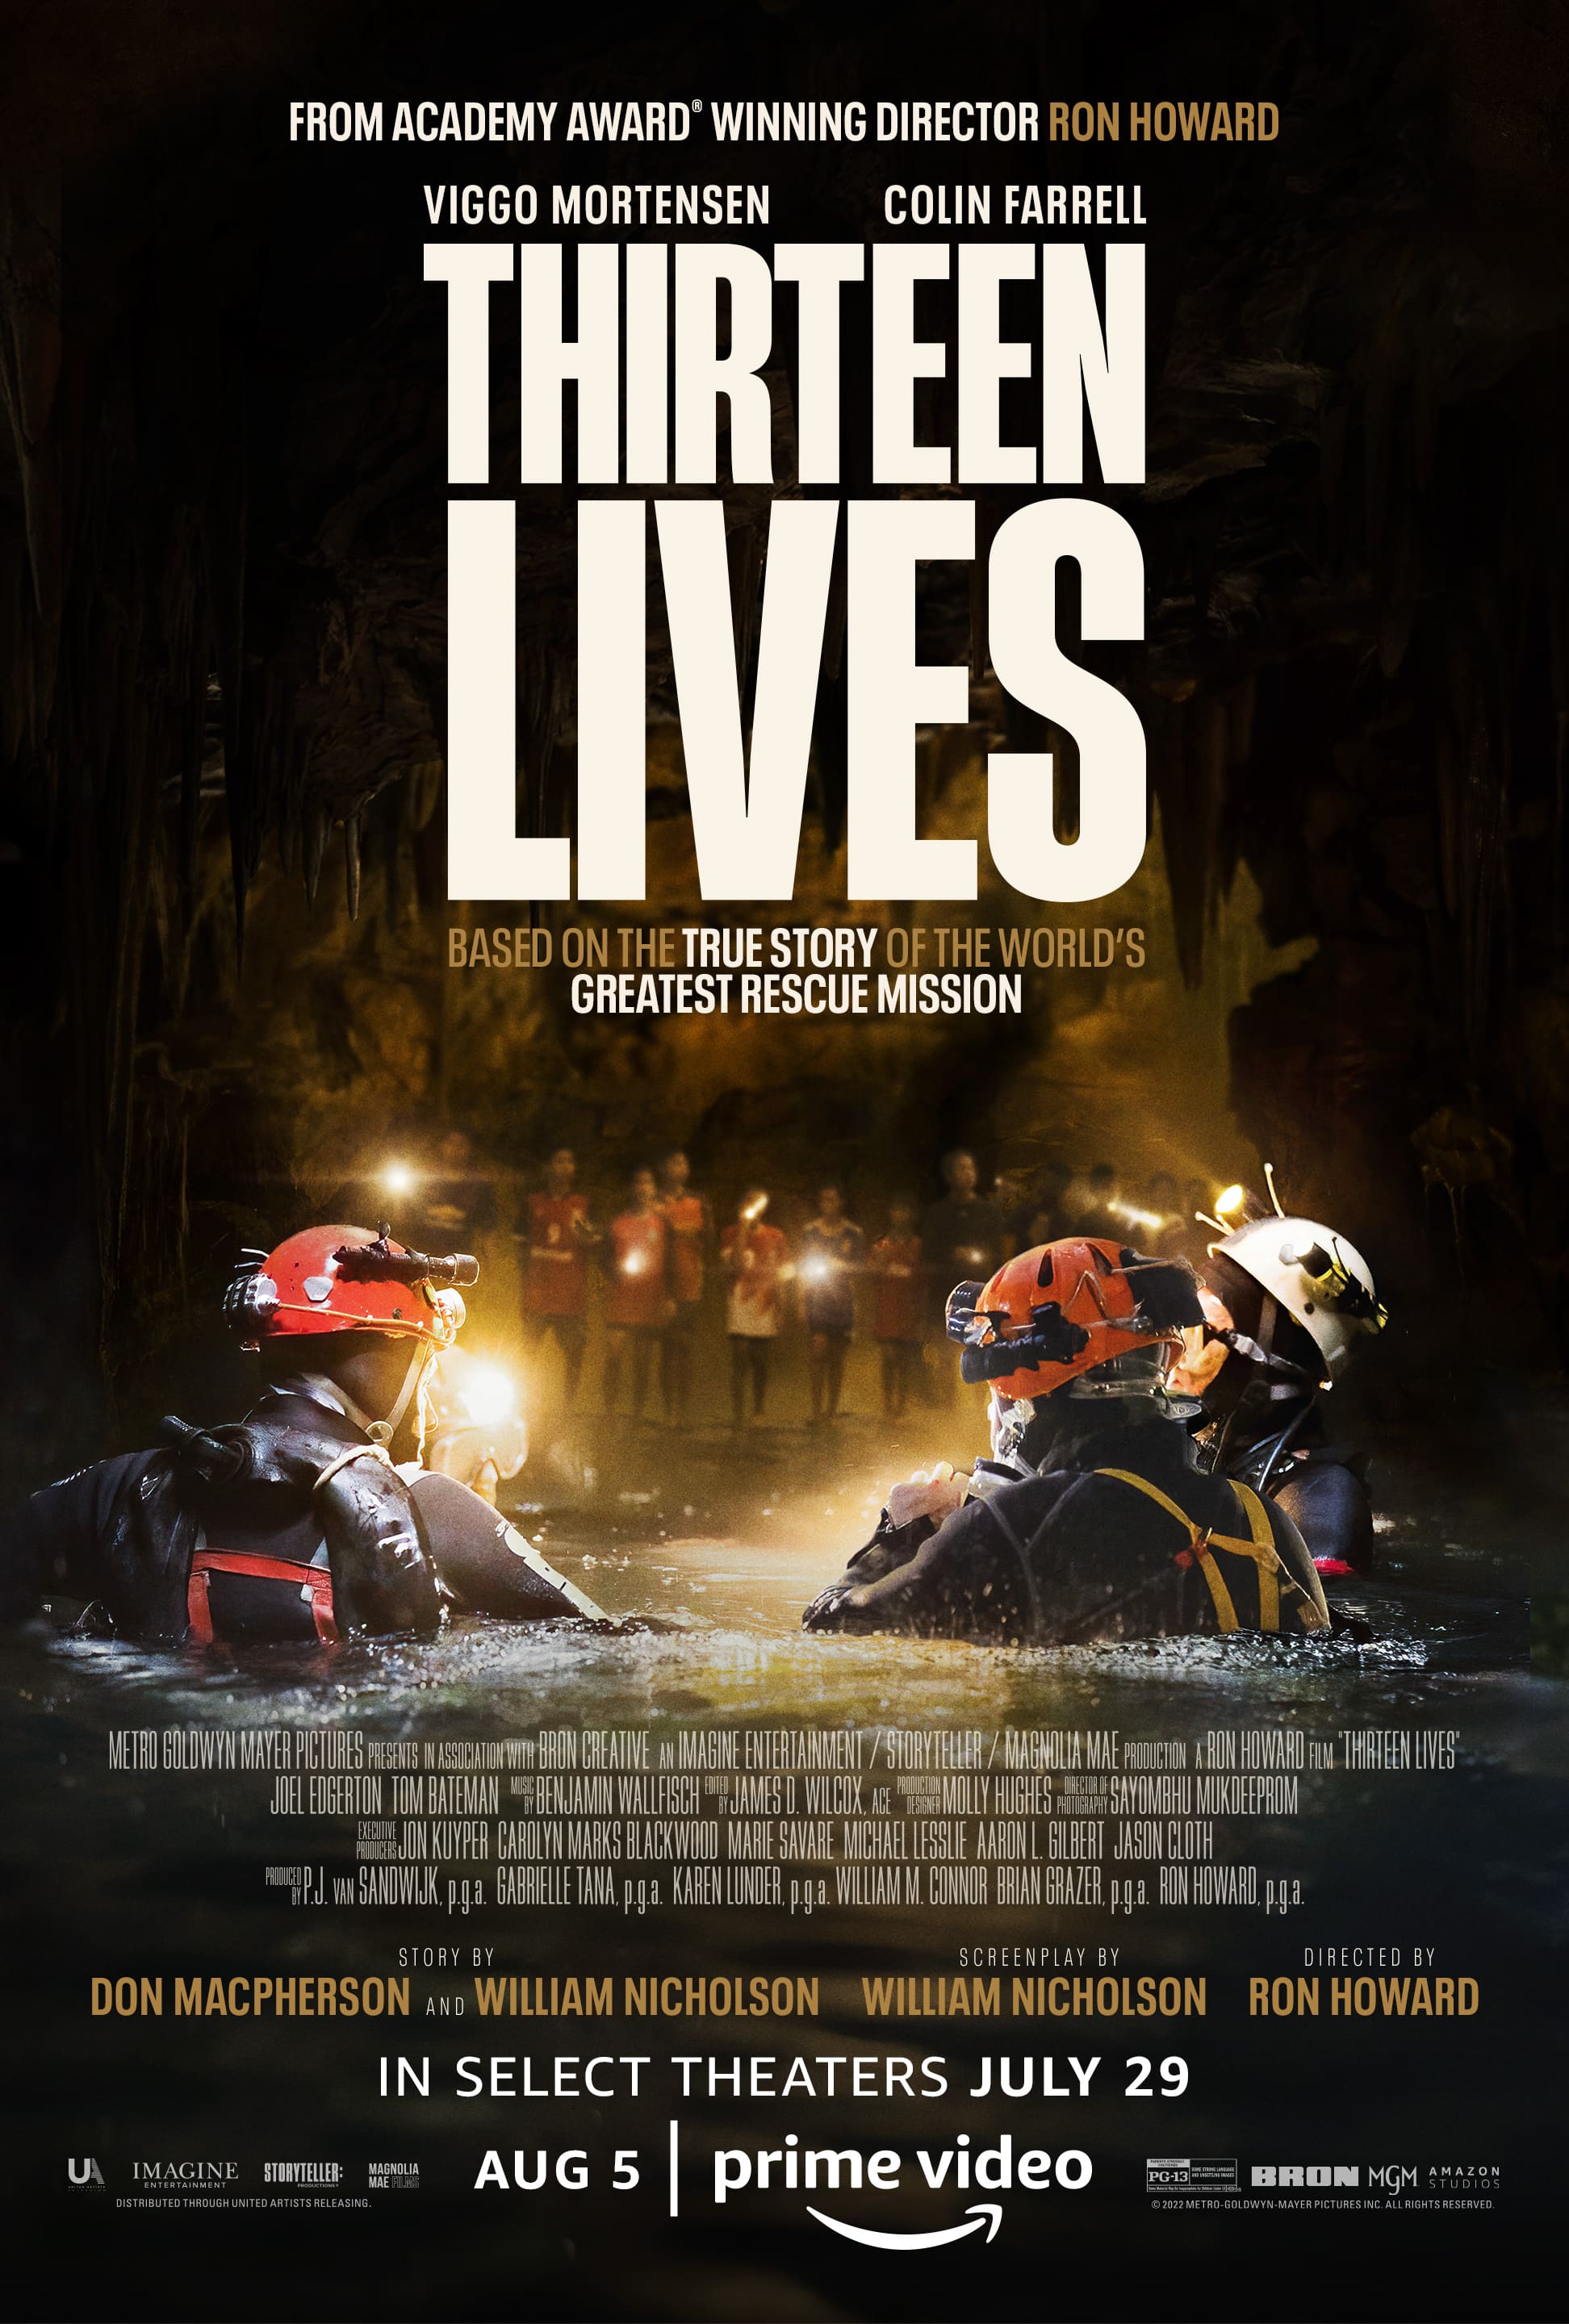 Helitreck Helicopters Star in the new 13 Lives Movie